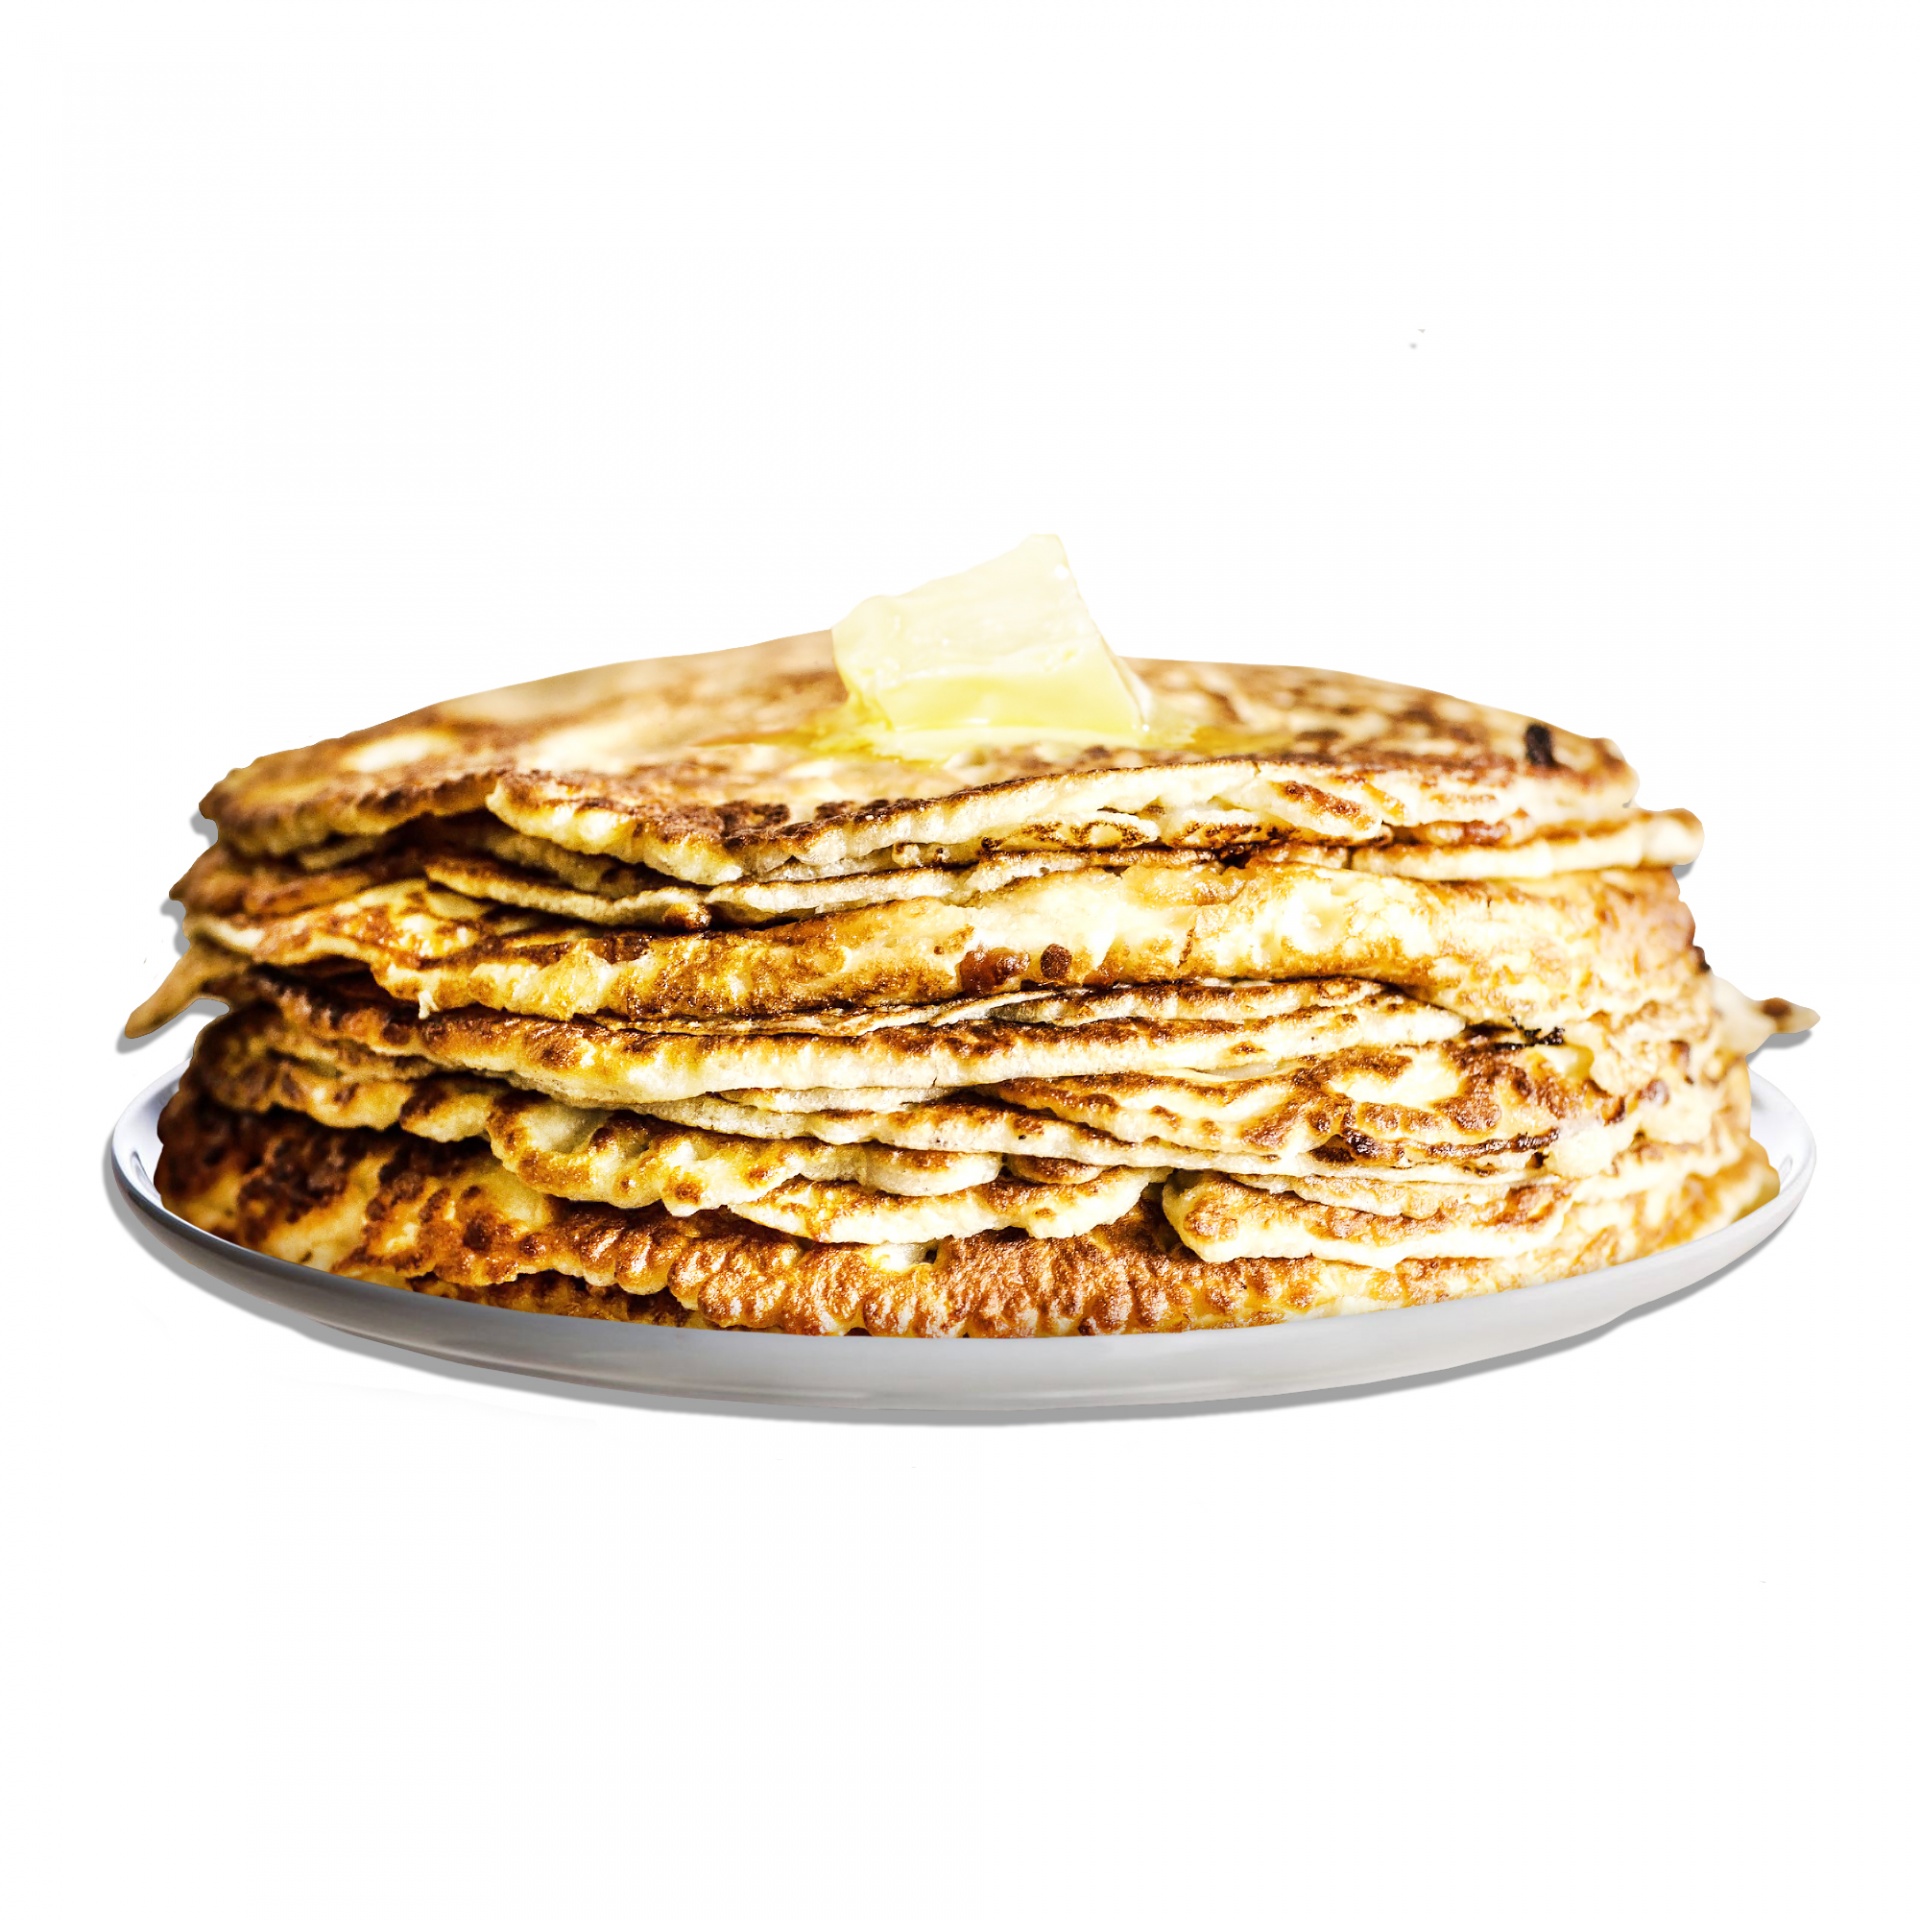 Lee's Whole Wheat and Nut Pancakes